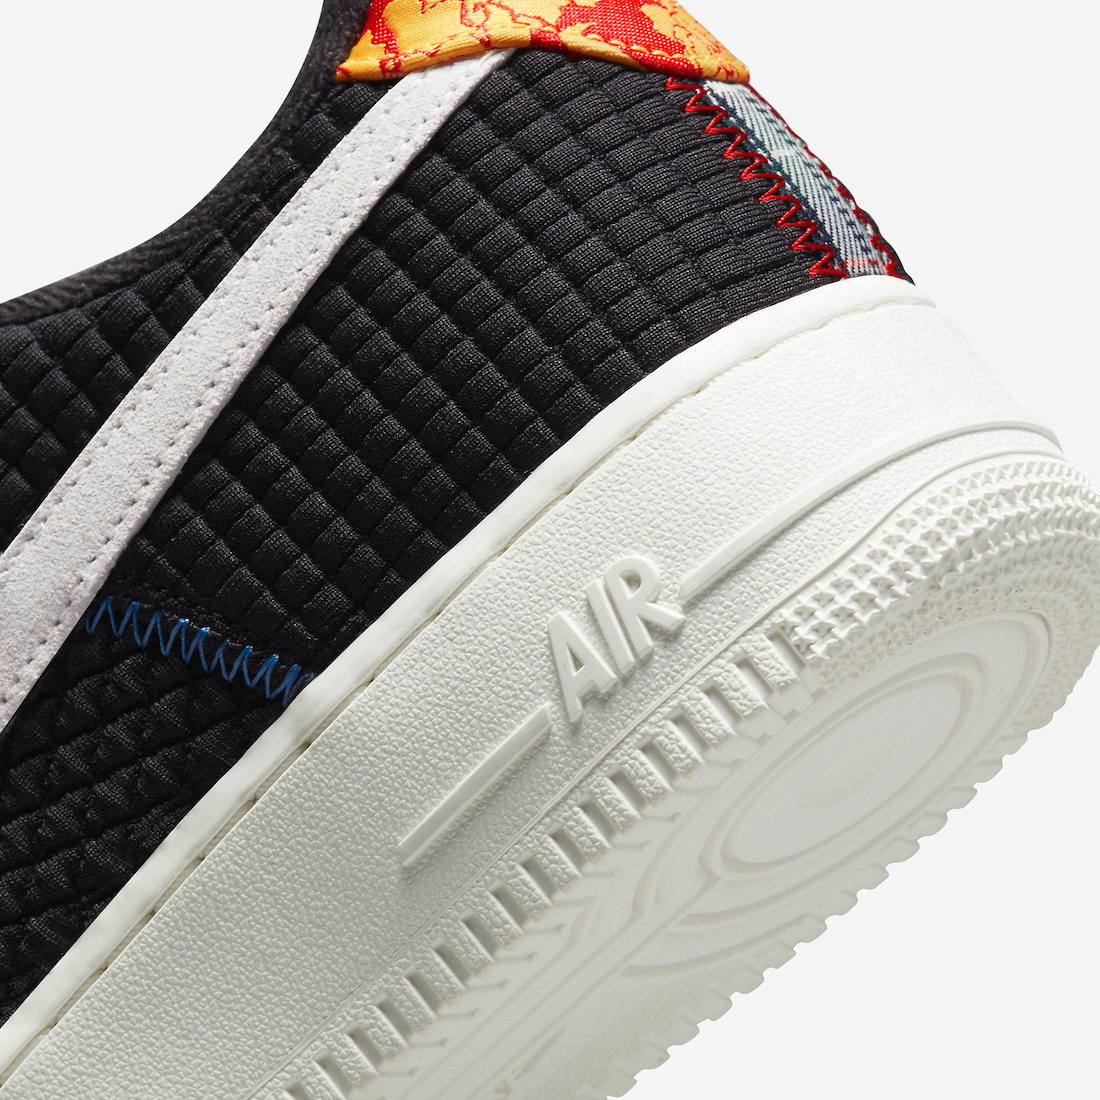 Nike Air Force 1 Low Multi Material DZ4855-001 Release Date Info